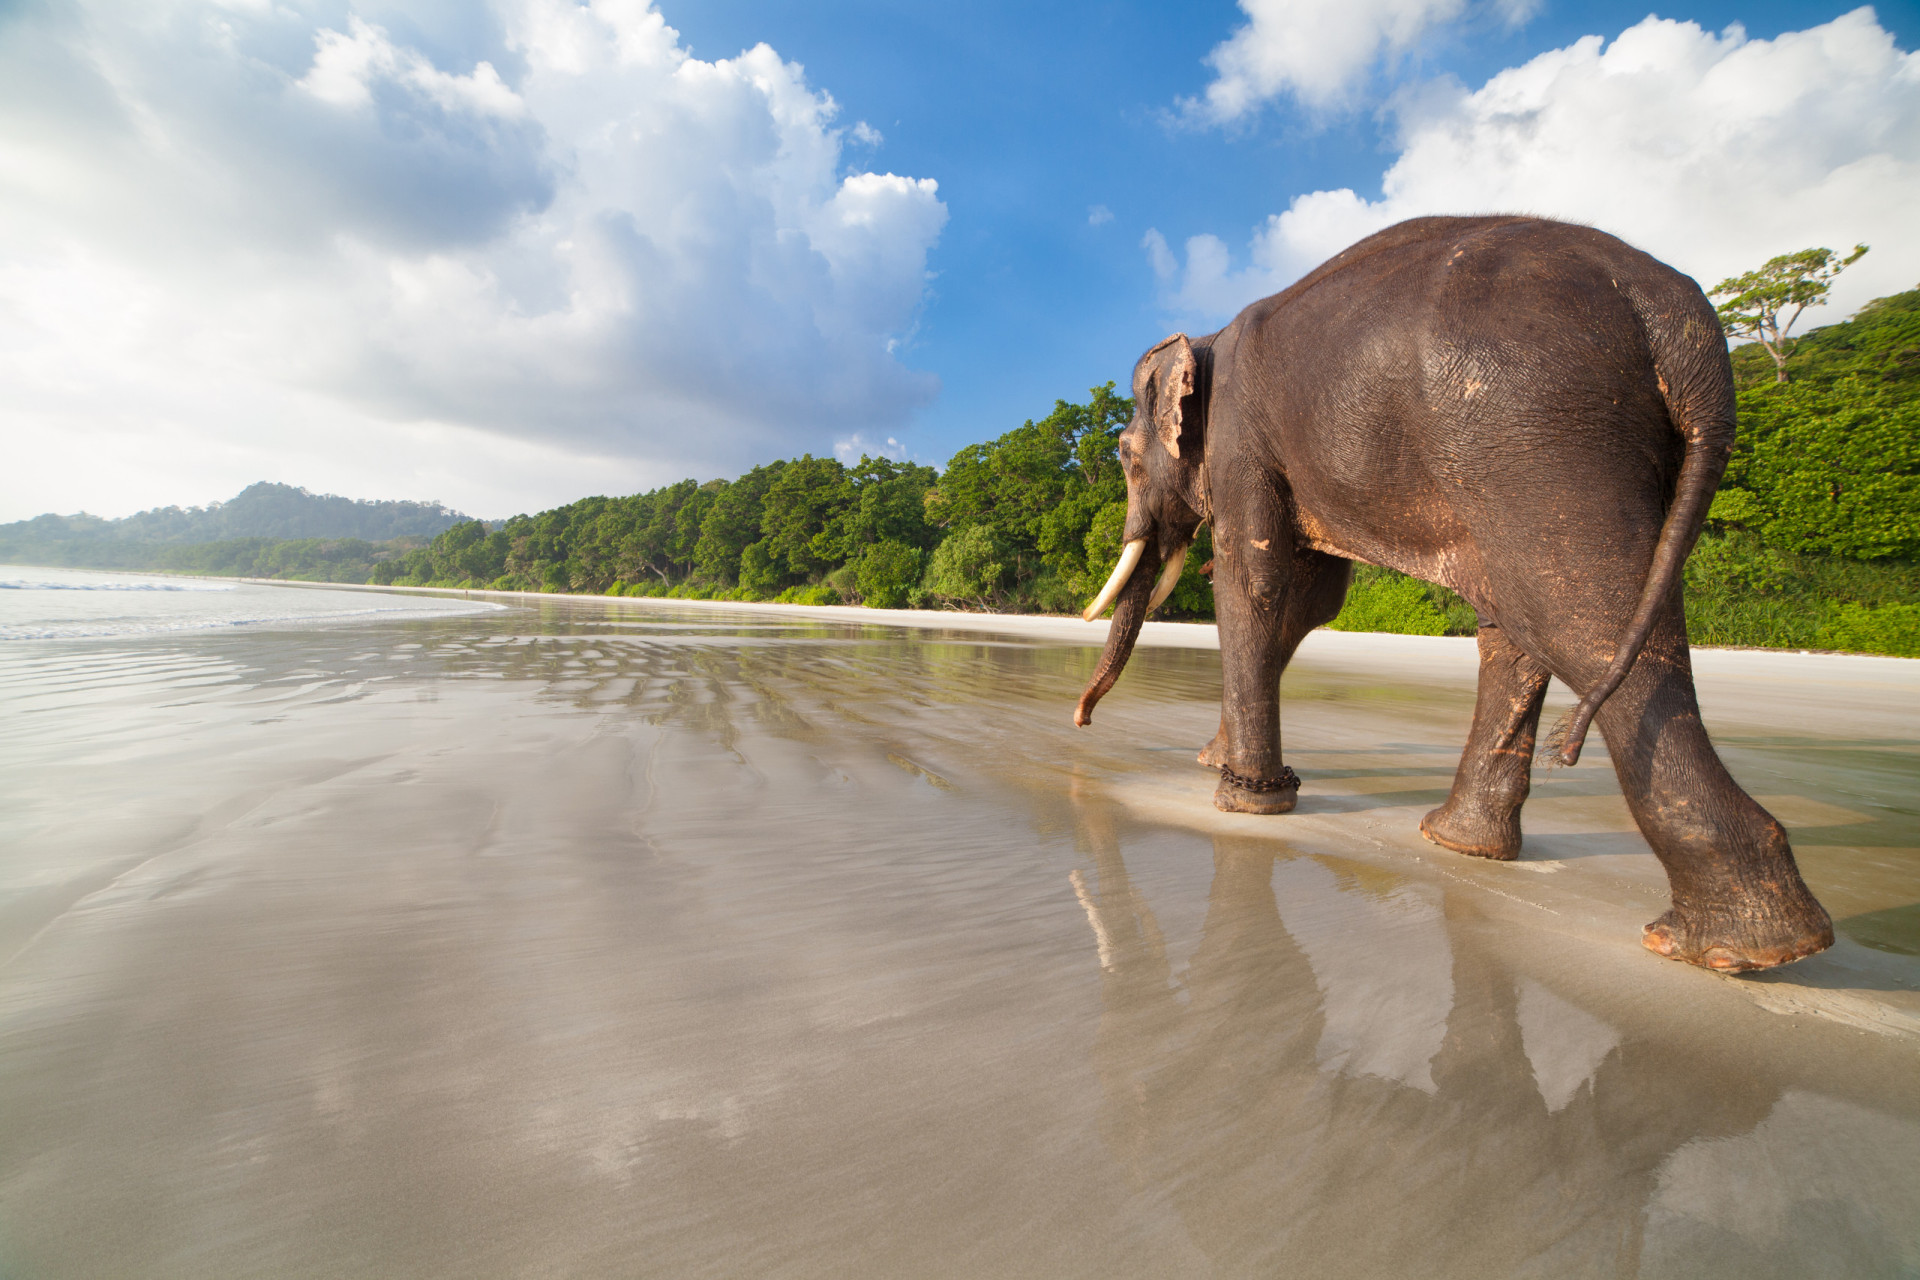 <p>Interview Island is one of the Andaman Islands. It has about 80-90 feral elephants, which were brought for forestry works. Elephants also roam the beaches of Swaraj Dweep.</p><p><a href="https://www.msn.com/en-my/community/channel/vid-7xx8mnucu55yw63we9va2gwr7uihbxwc68fxqp25x6tg4ftibpra?cvid=94631541bc0f4f89bfd59158d696ad7e">Follow us and access great exclusive content every day</a></p>